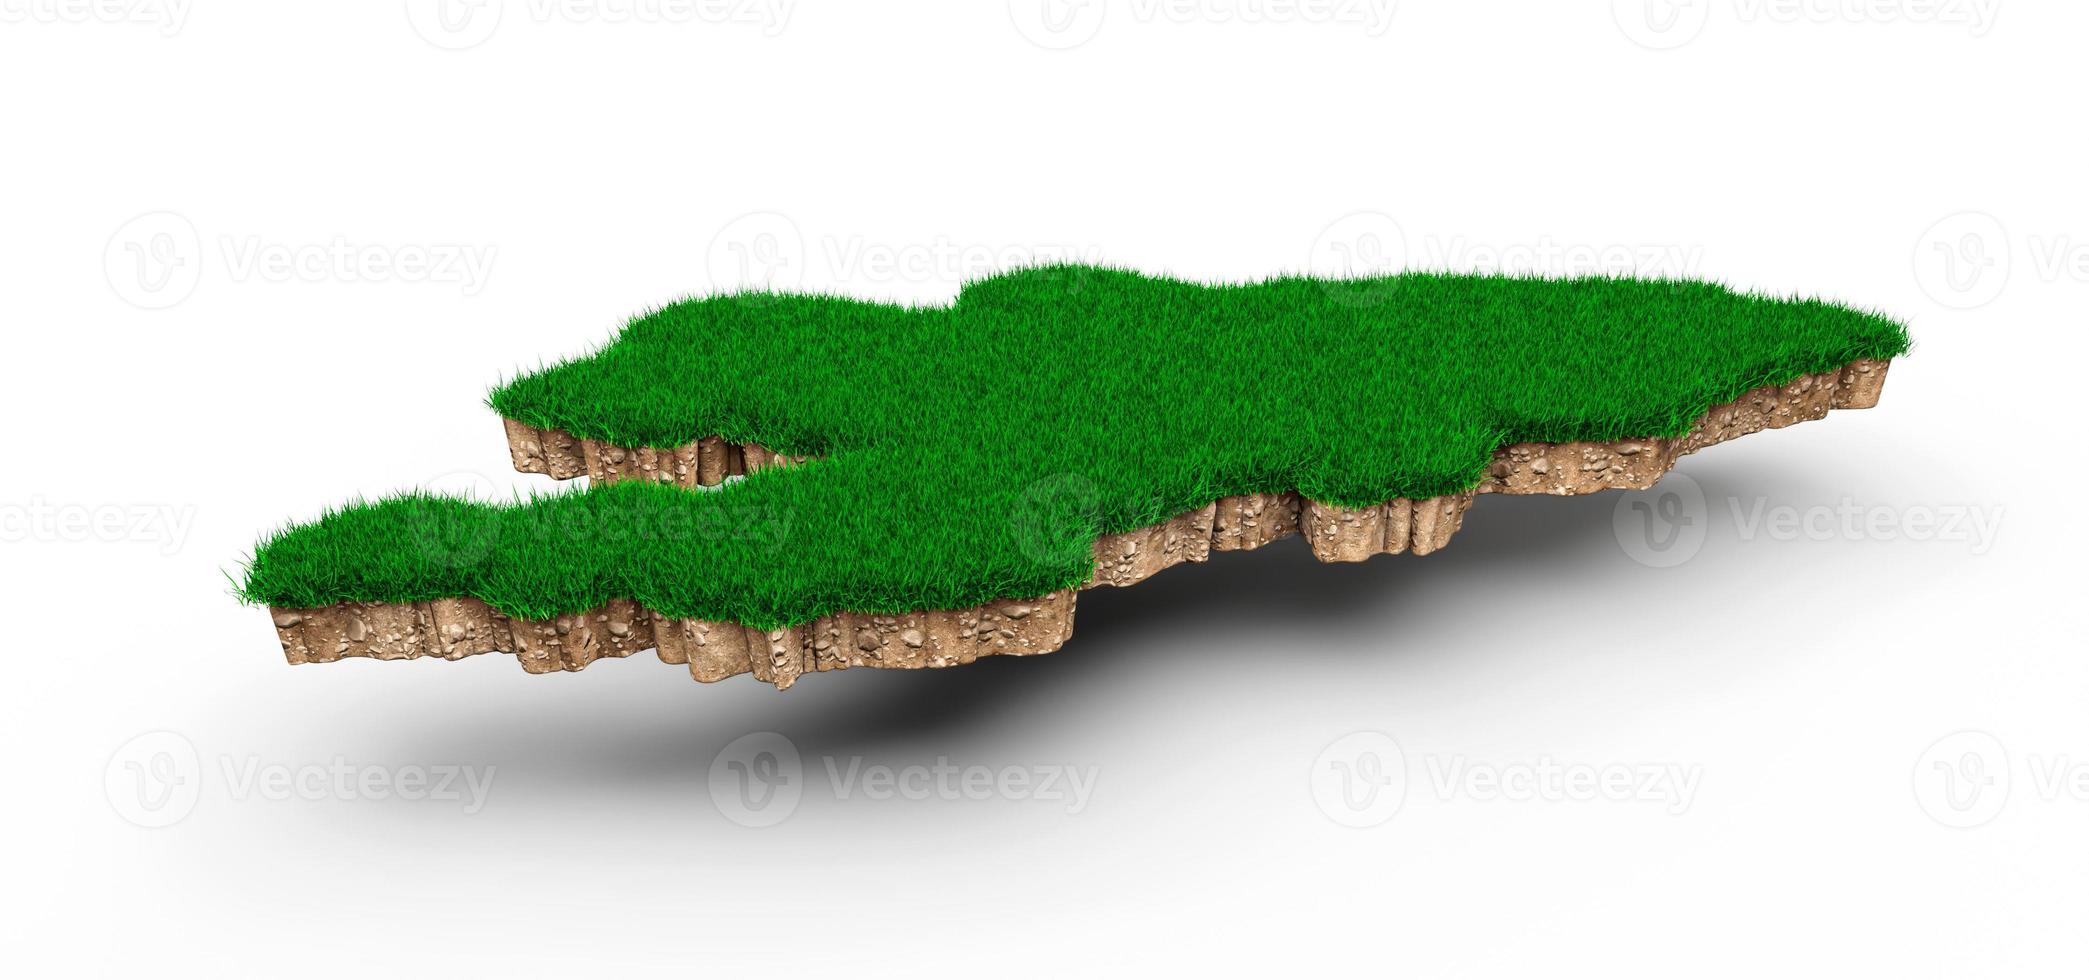 Kyrgyzstan Map soil land geology cross section with green grass and Rock ground texture 3d illustration photo